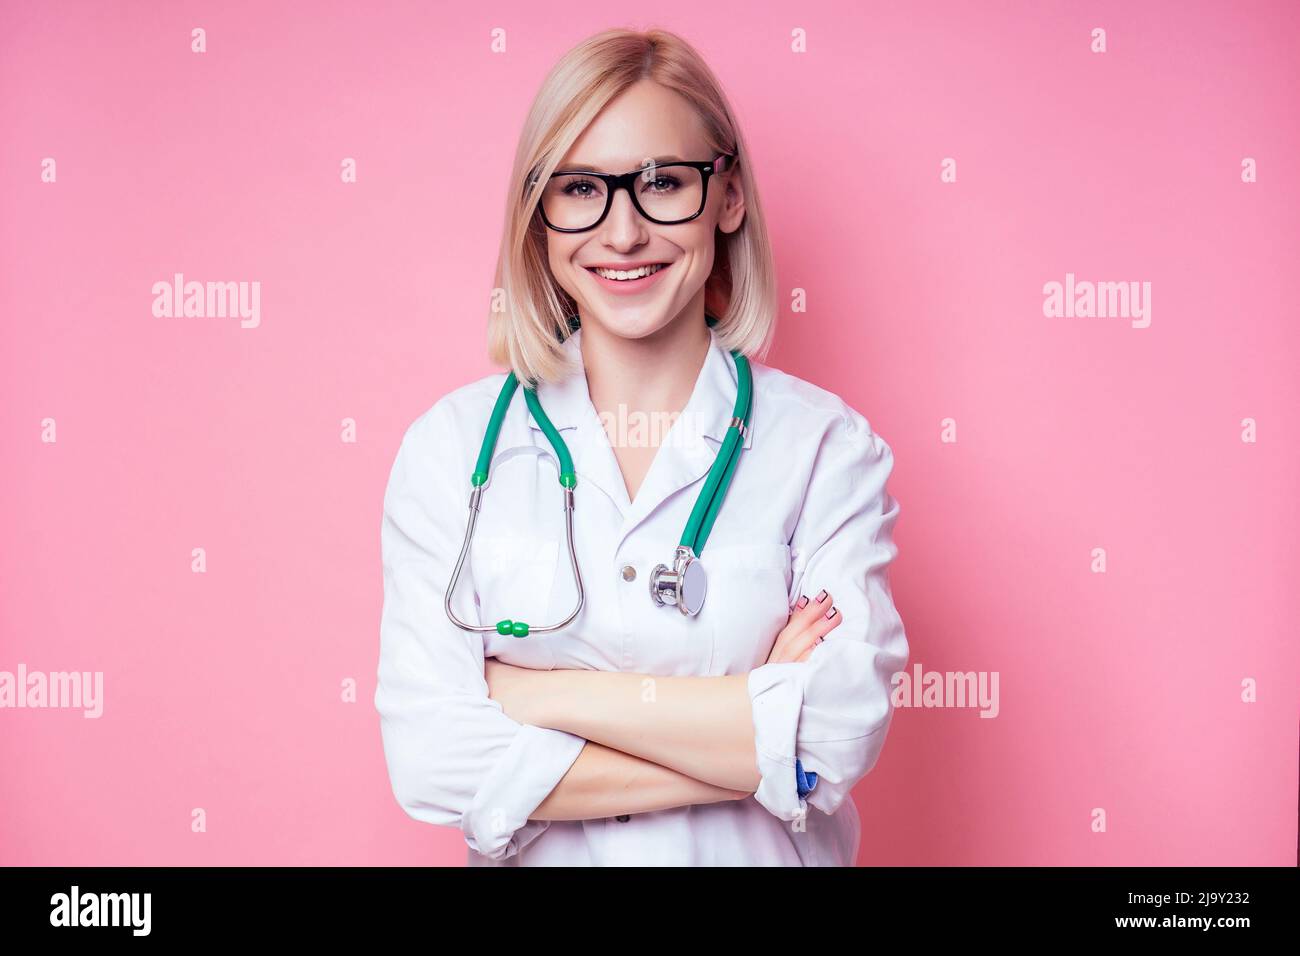 Portrait of a smiling female gynecologist doctor.beautiful blonde woman in white medical coat and glasses holding a stethoscope on a pink background Stock Photo